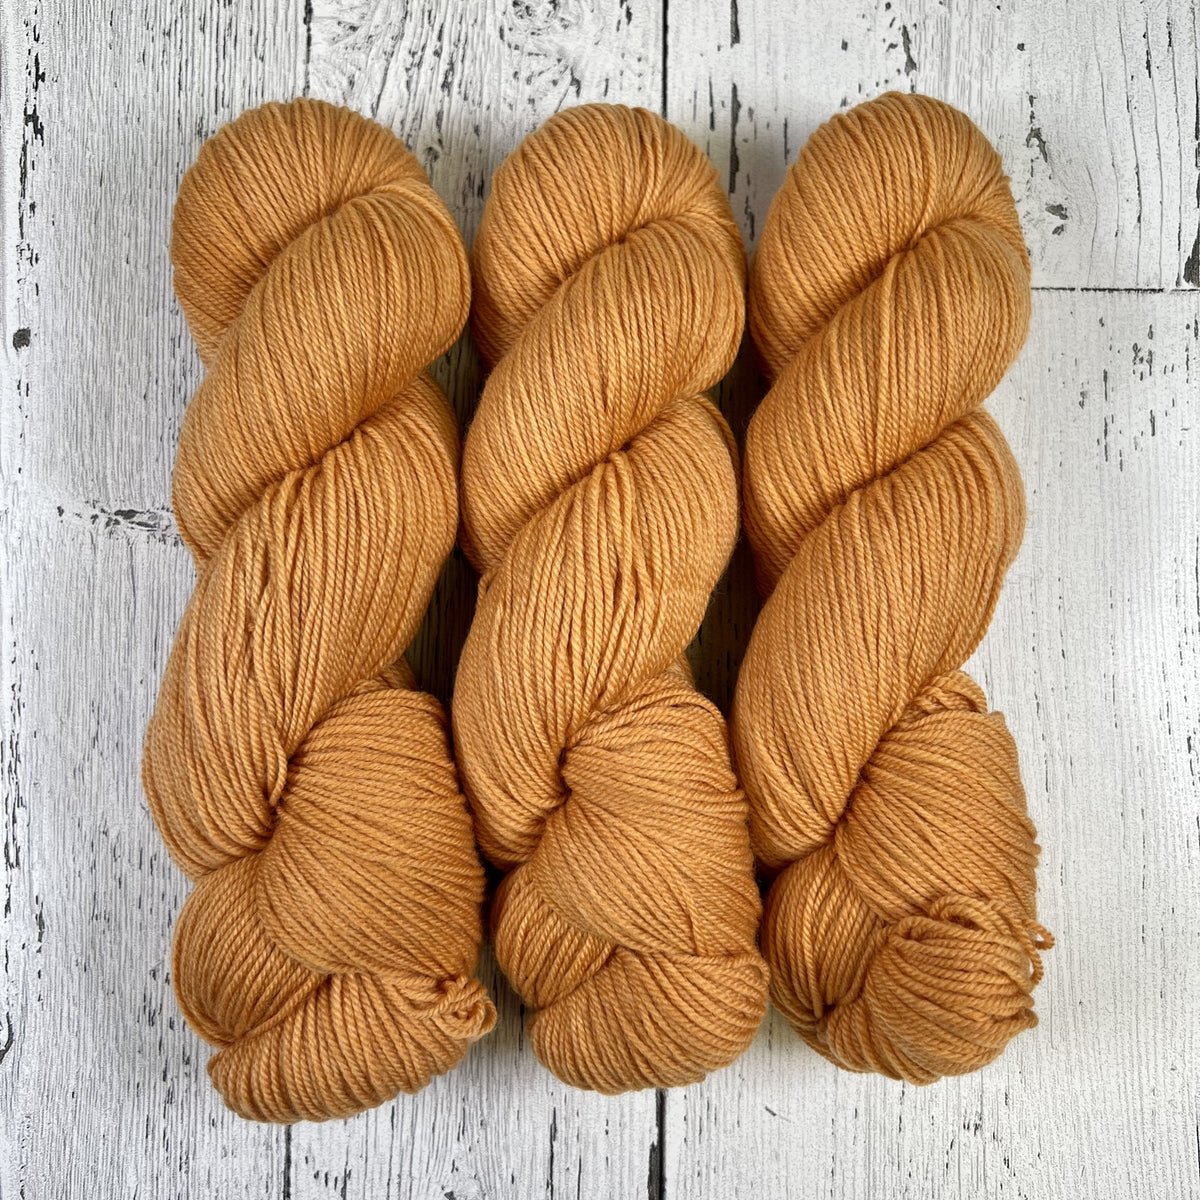 Apricot in Fingering / Sock Weight